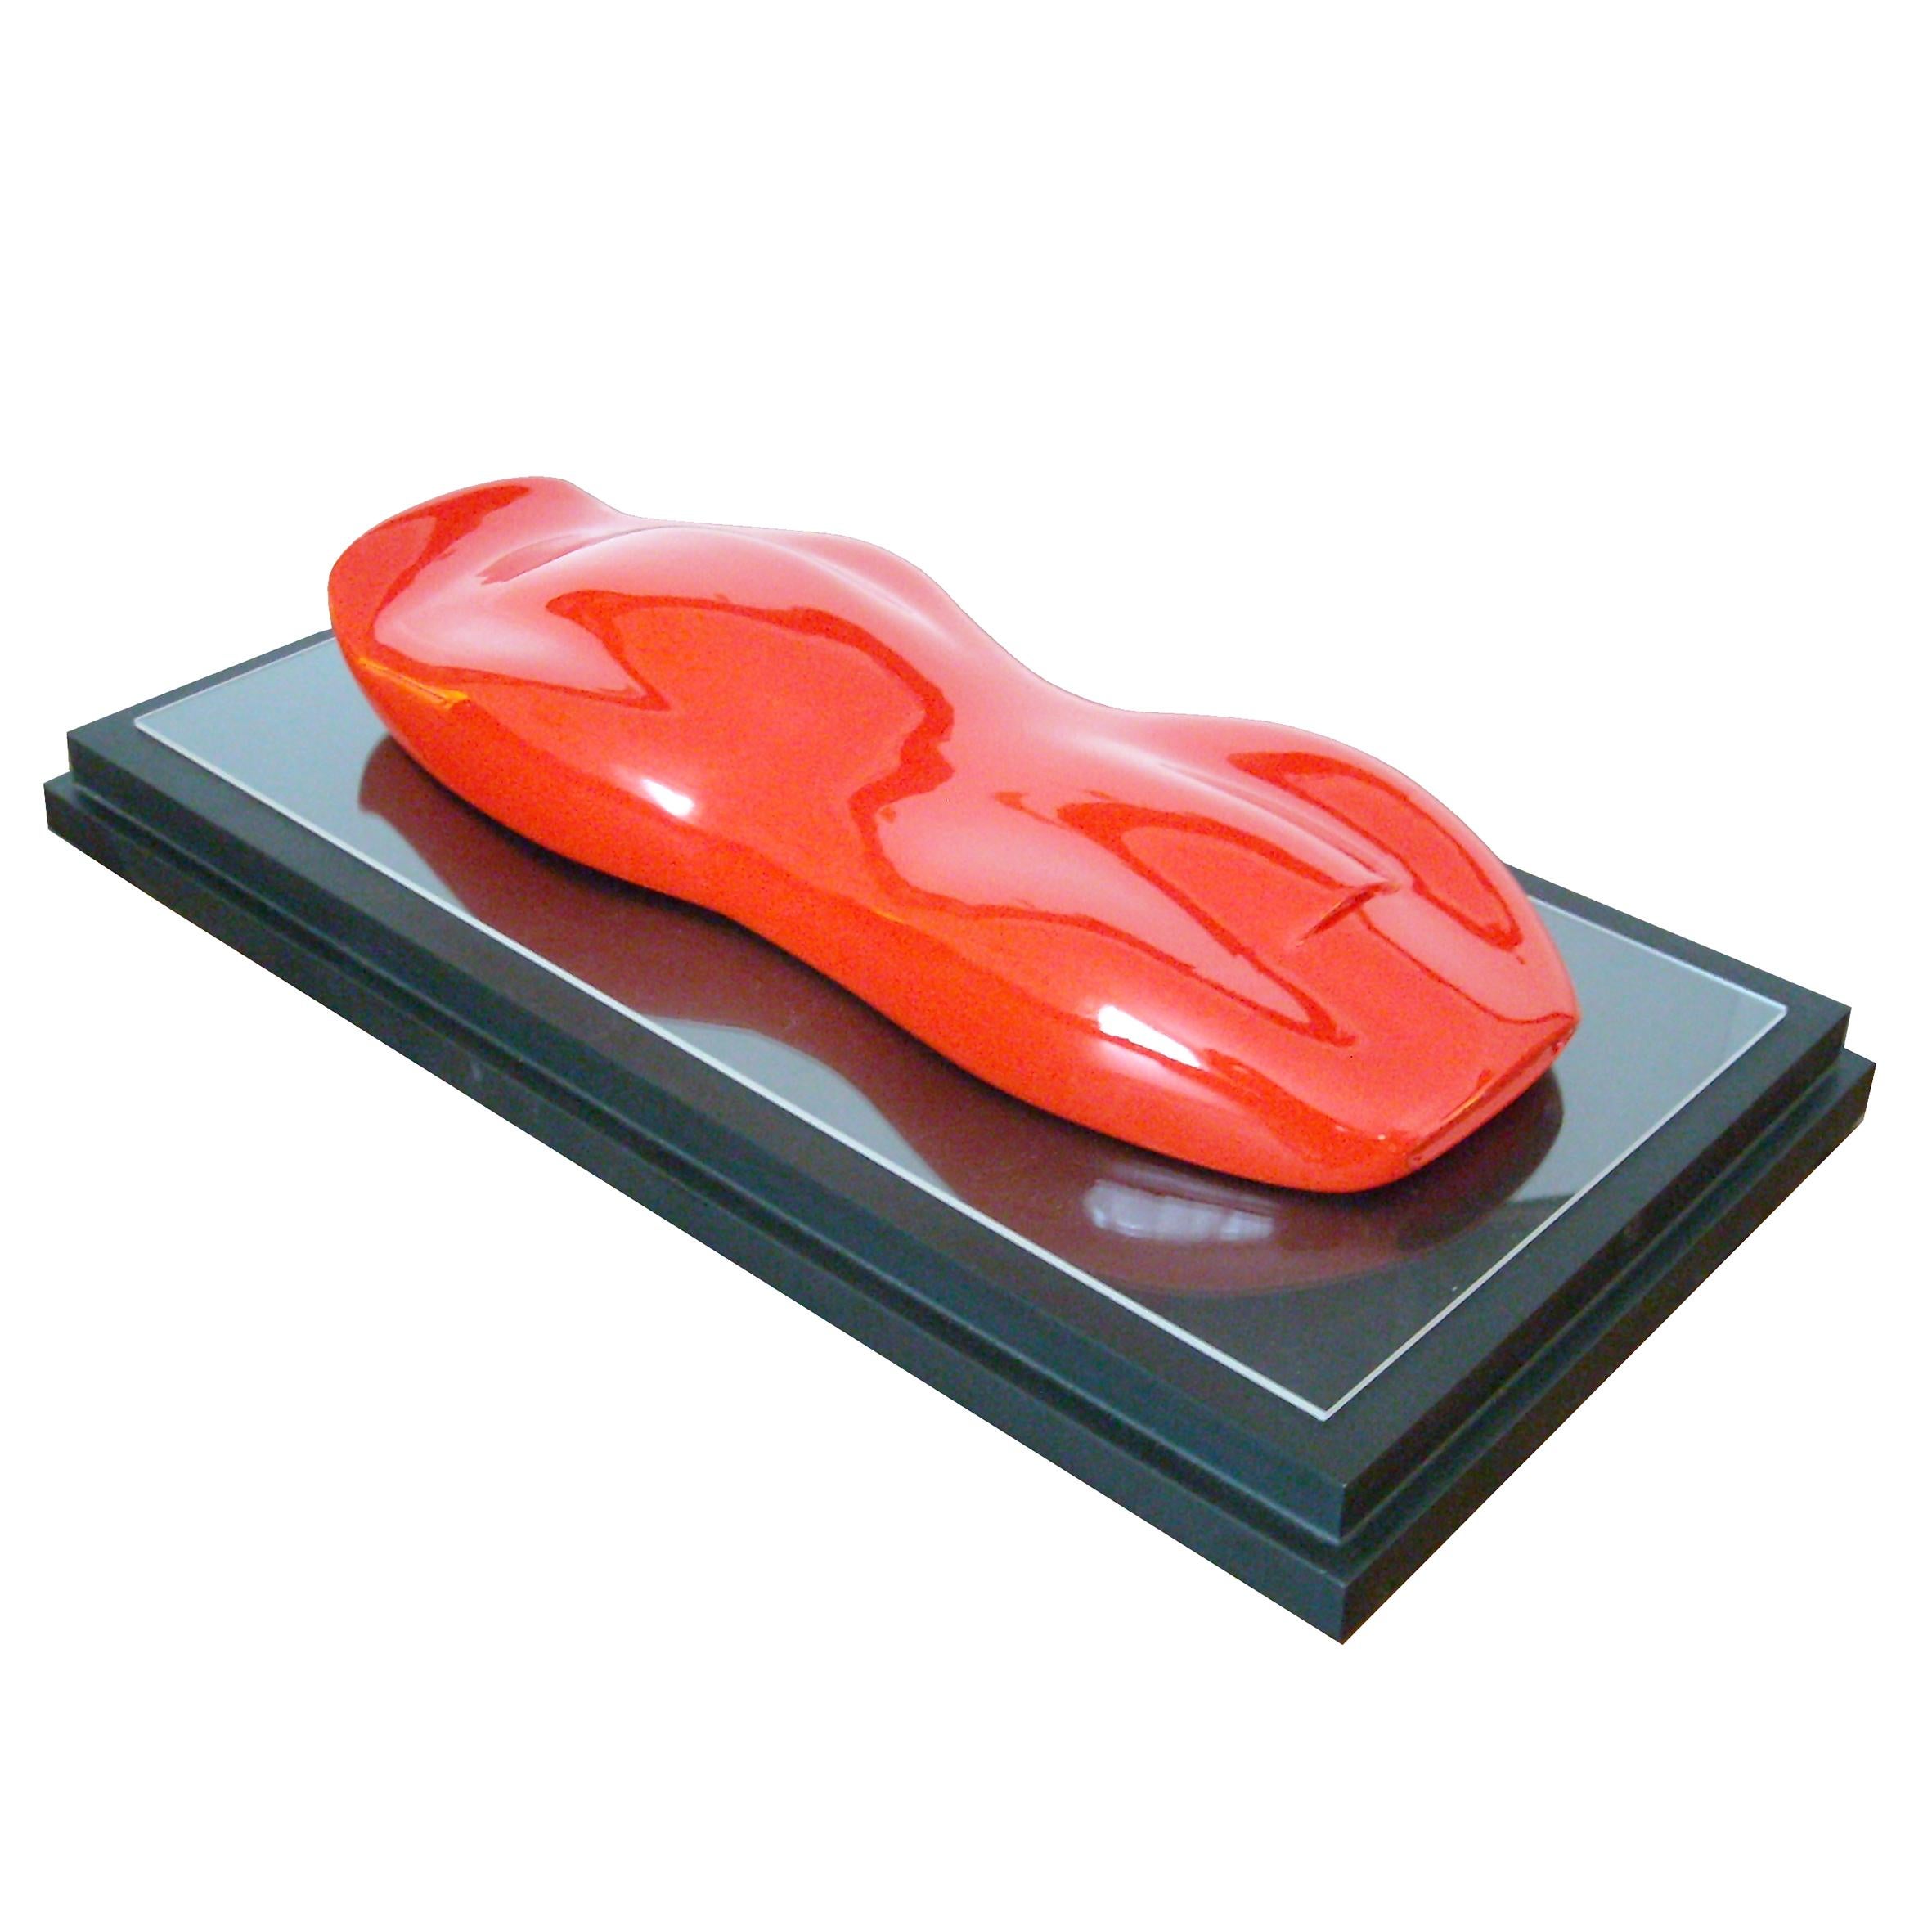 French Belzoni, a Racing Car Sculpture, 